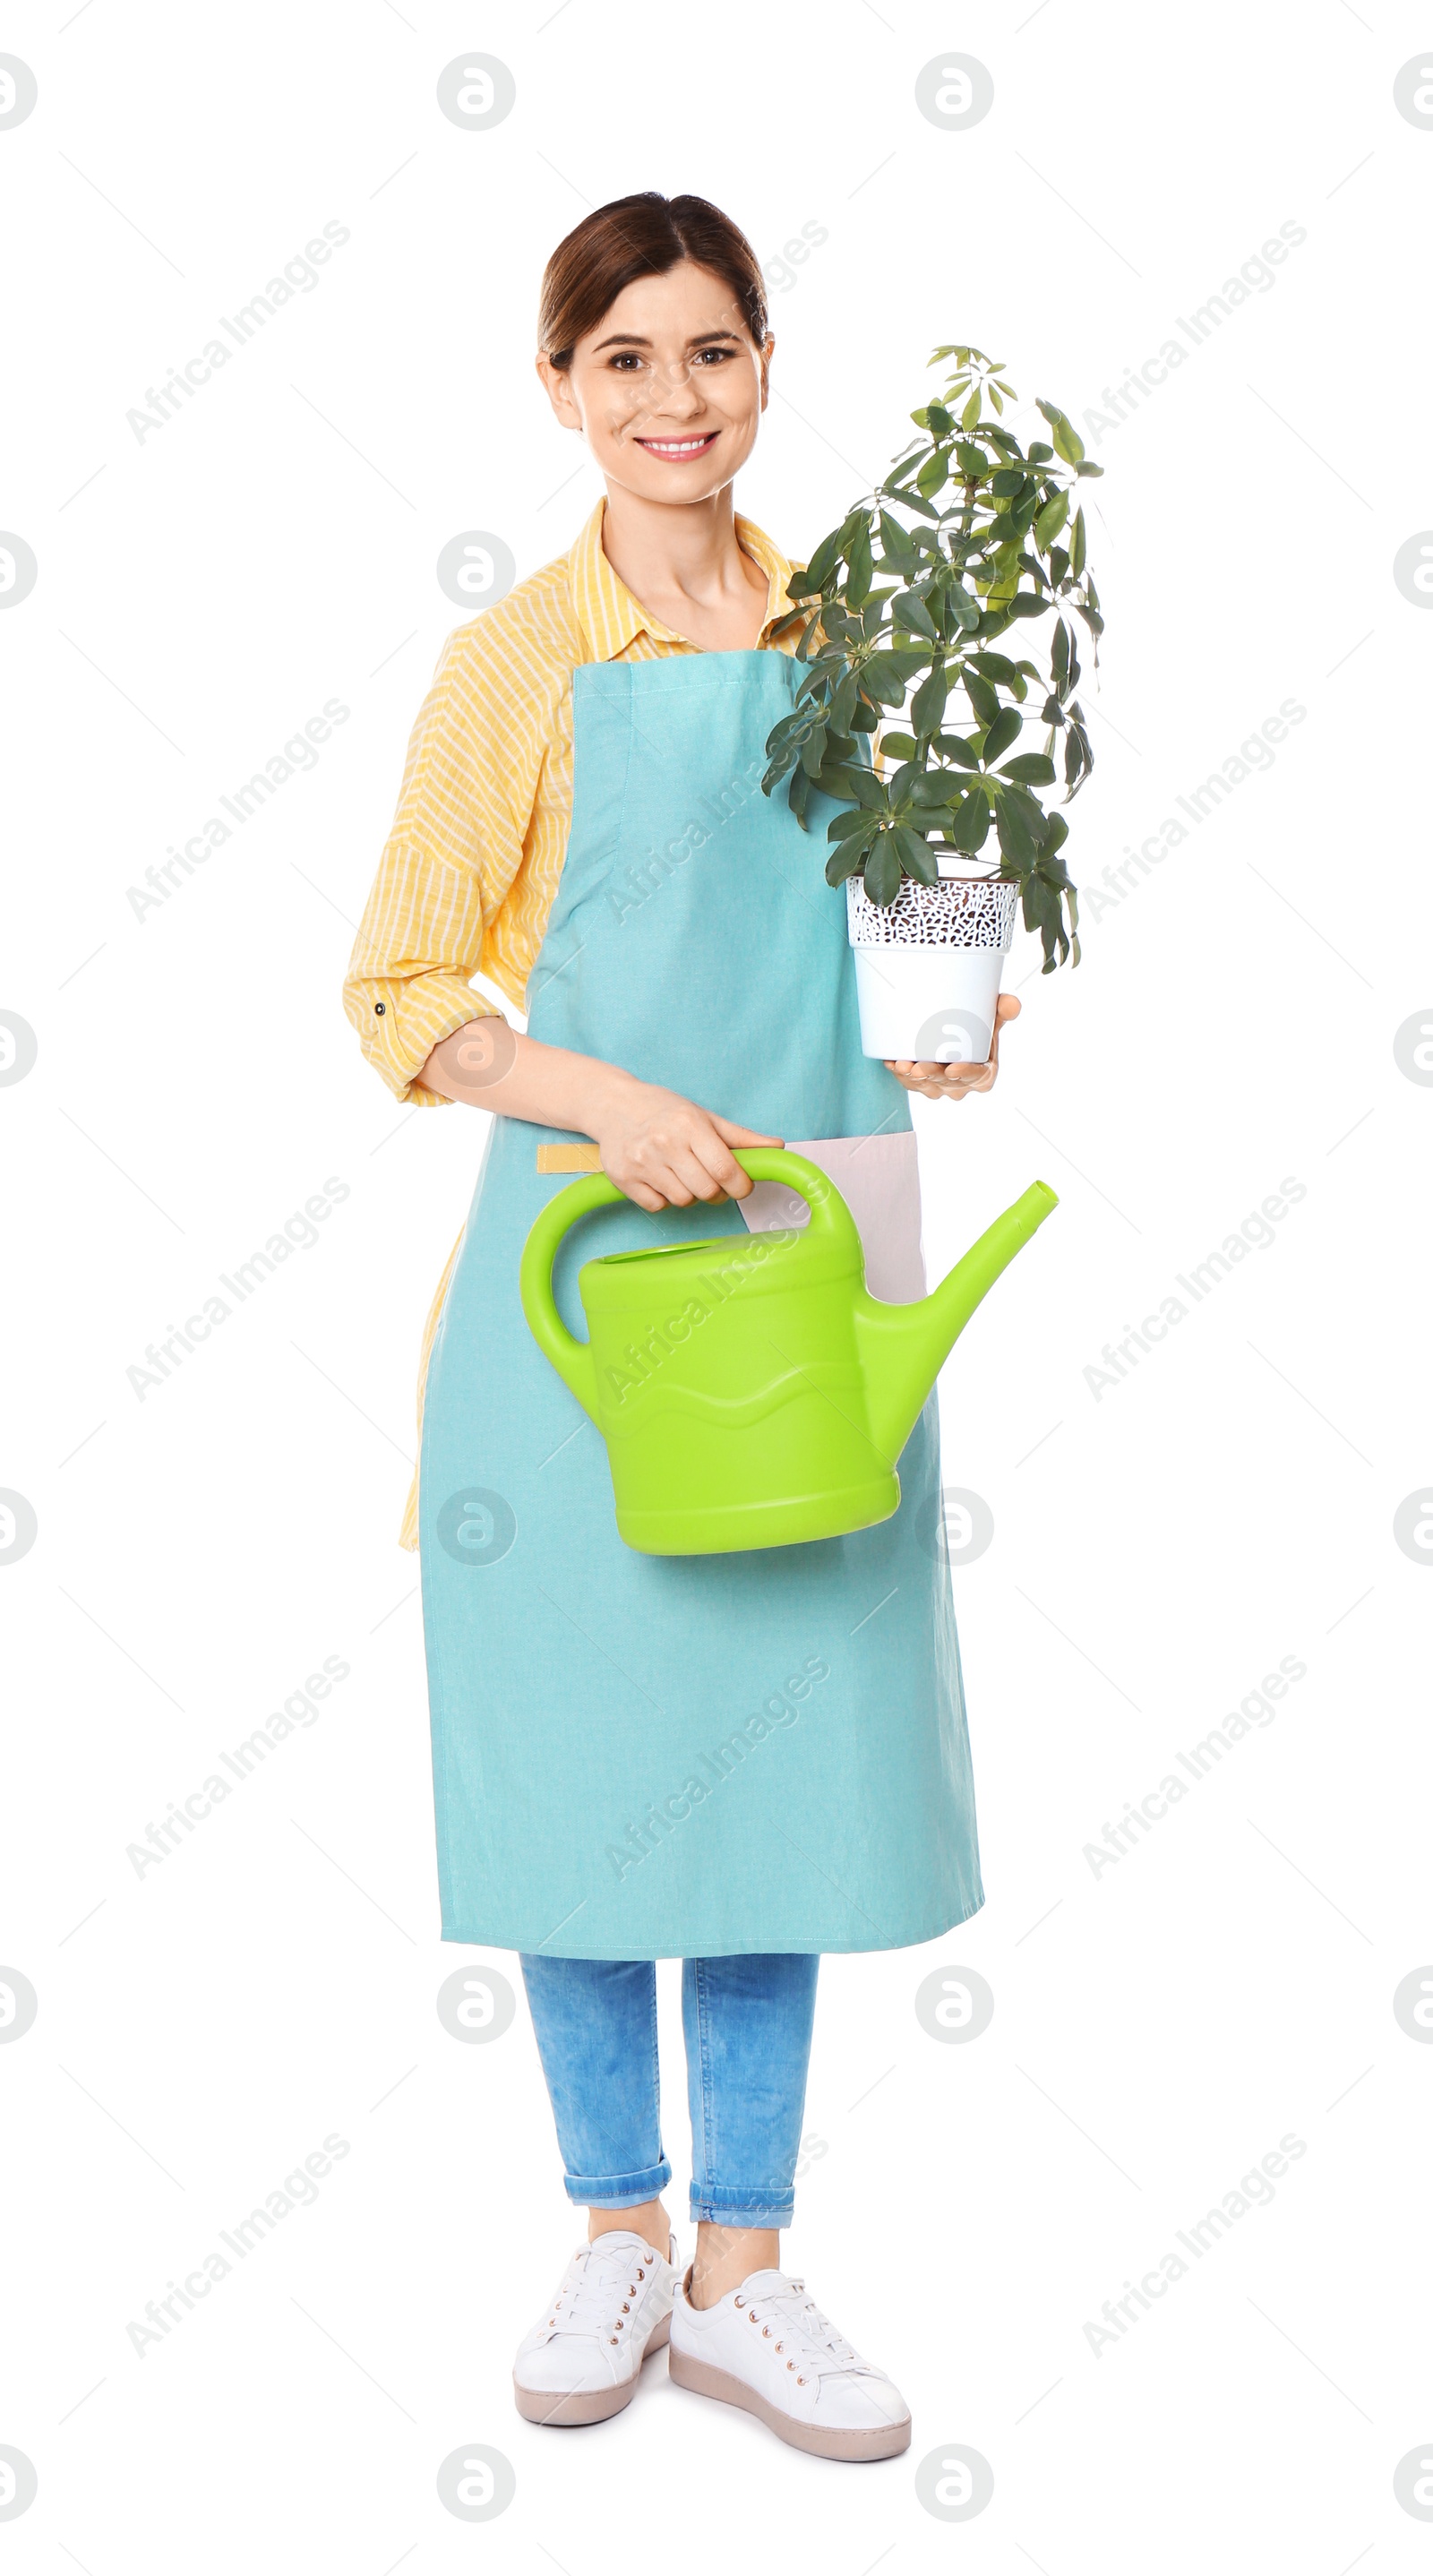 Photo of Female florist holding houseplant and watering can on white background